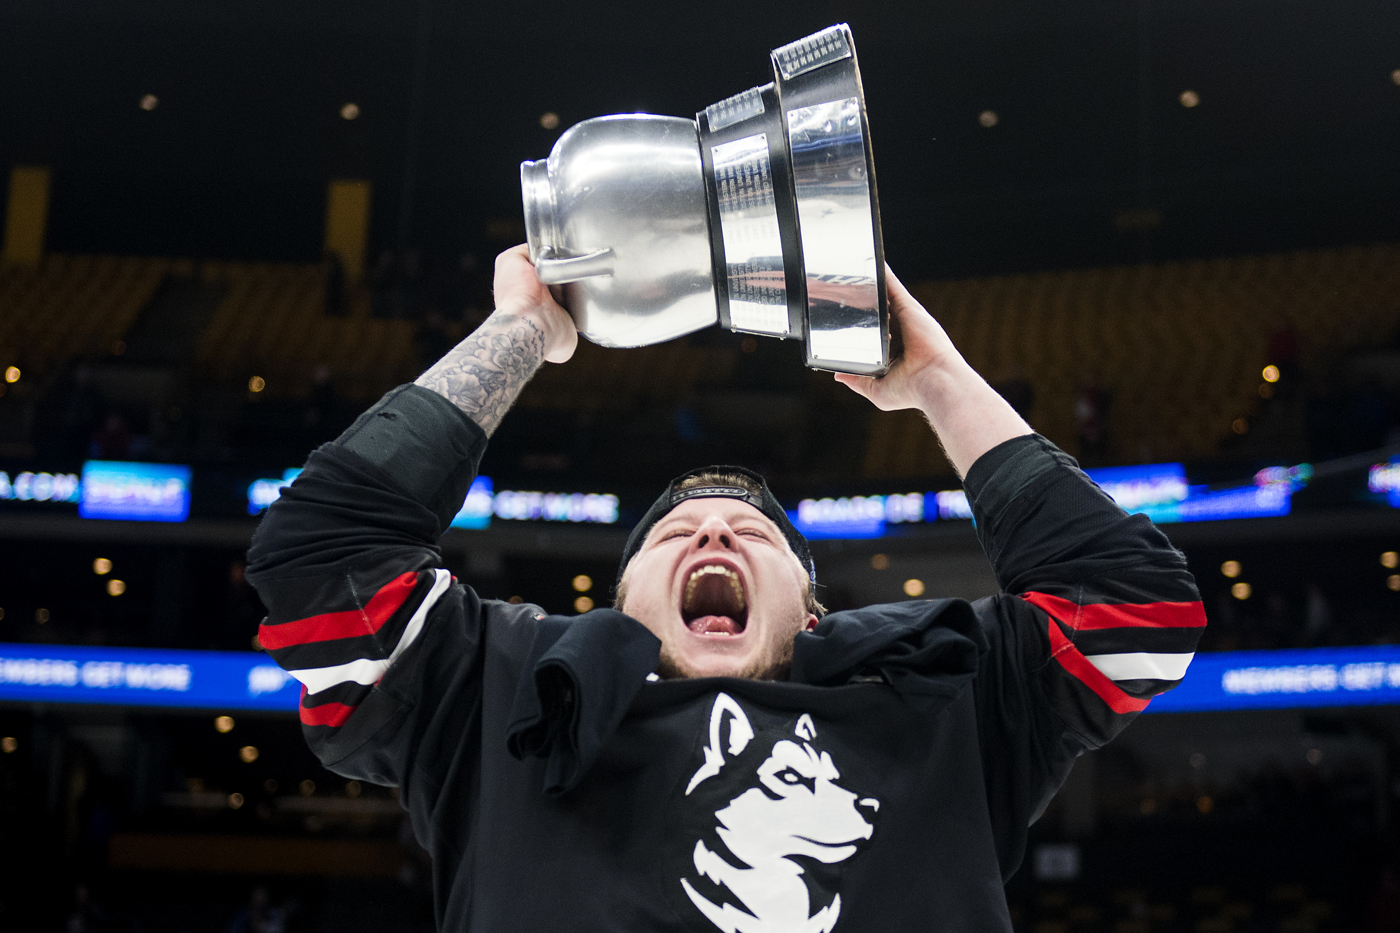 Full Coverage of the 2019 Beanpot Final